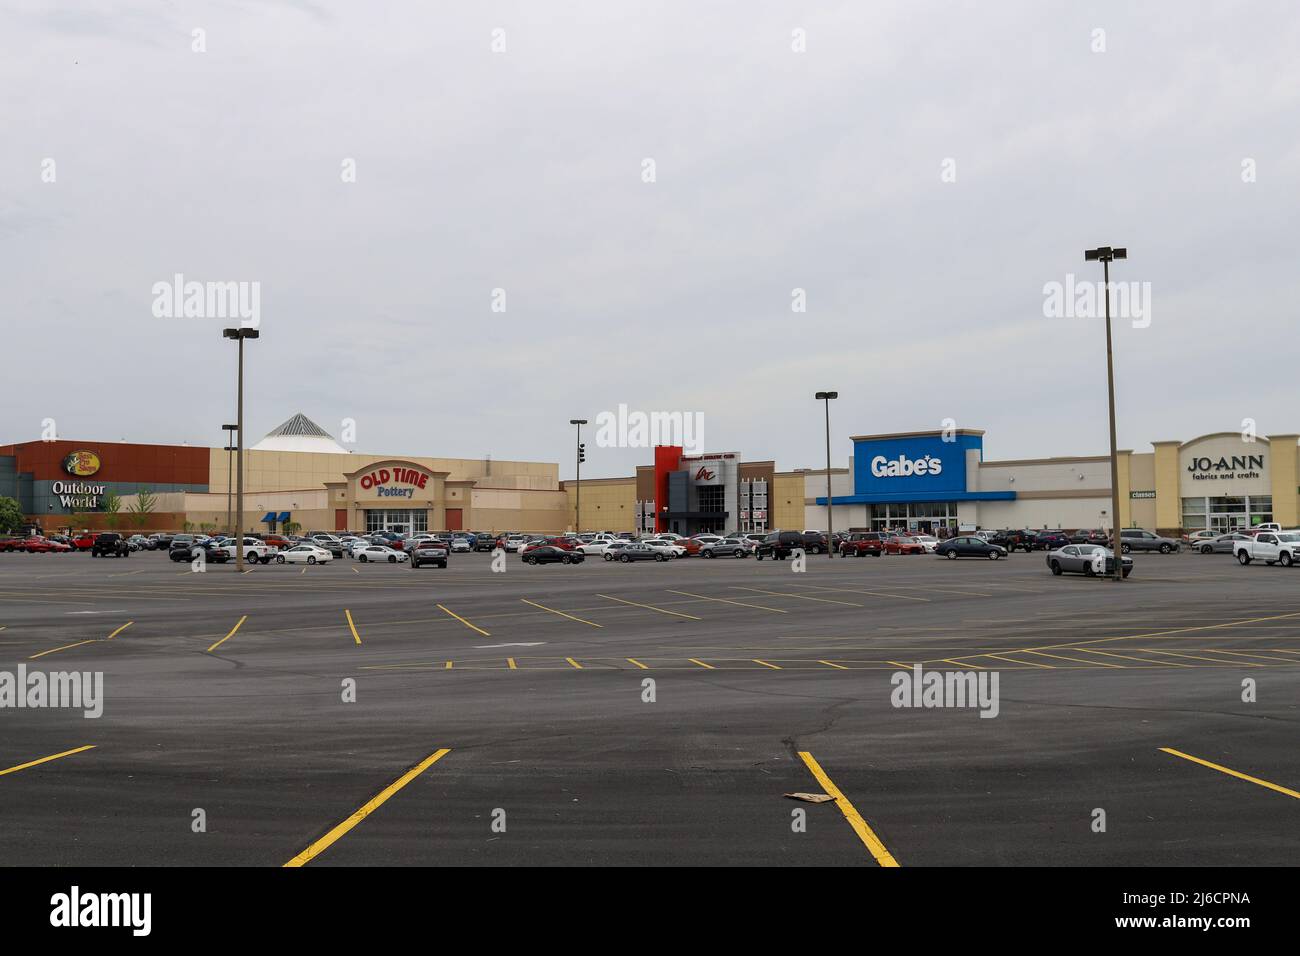 Clarksville, Indiana USA  April 30, 2022: The exterior of buildings of a shopping center in Clarksville,  Indiana Stock Photo